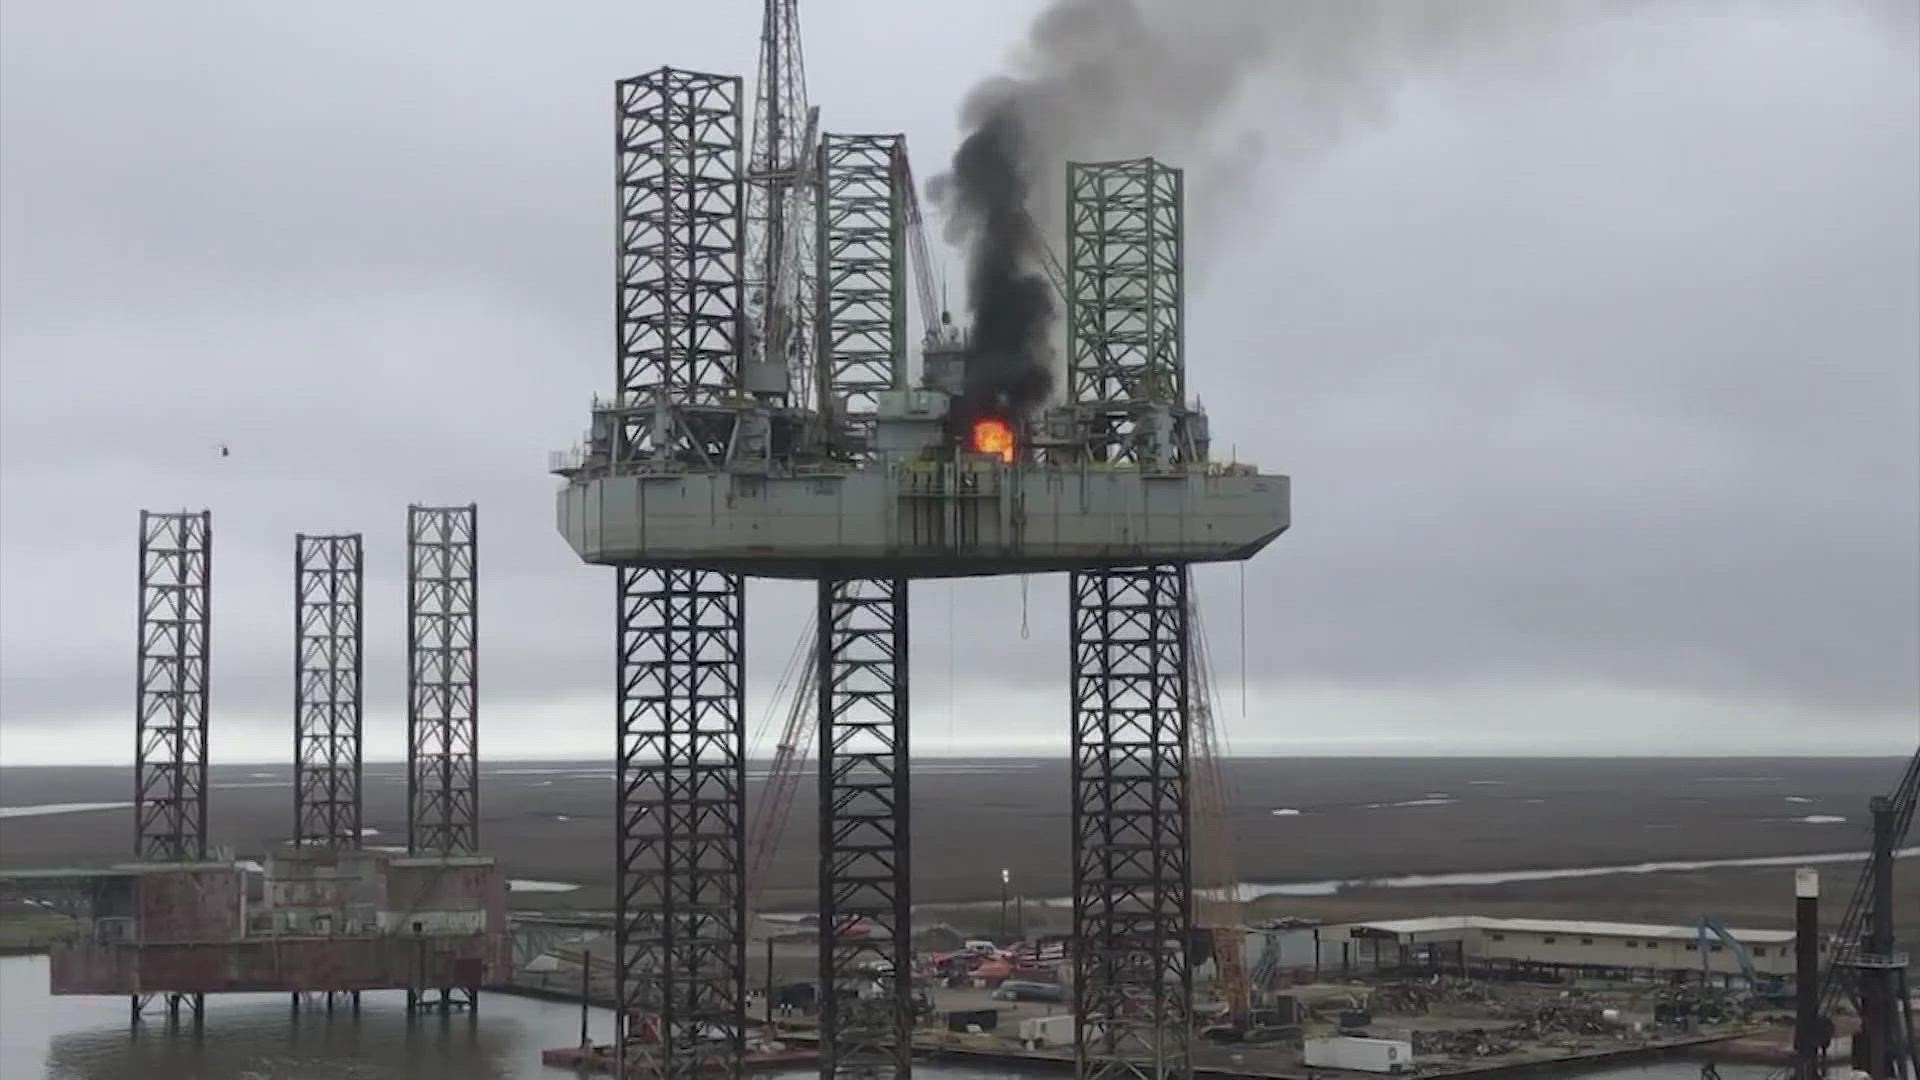 Helicopter rescues 9 workers from Texas oil rig fire in shipyard | khou.com